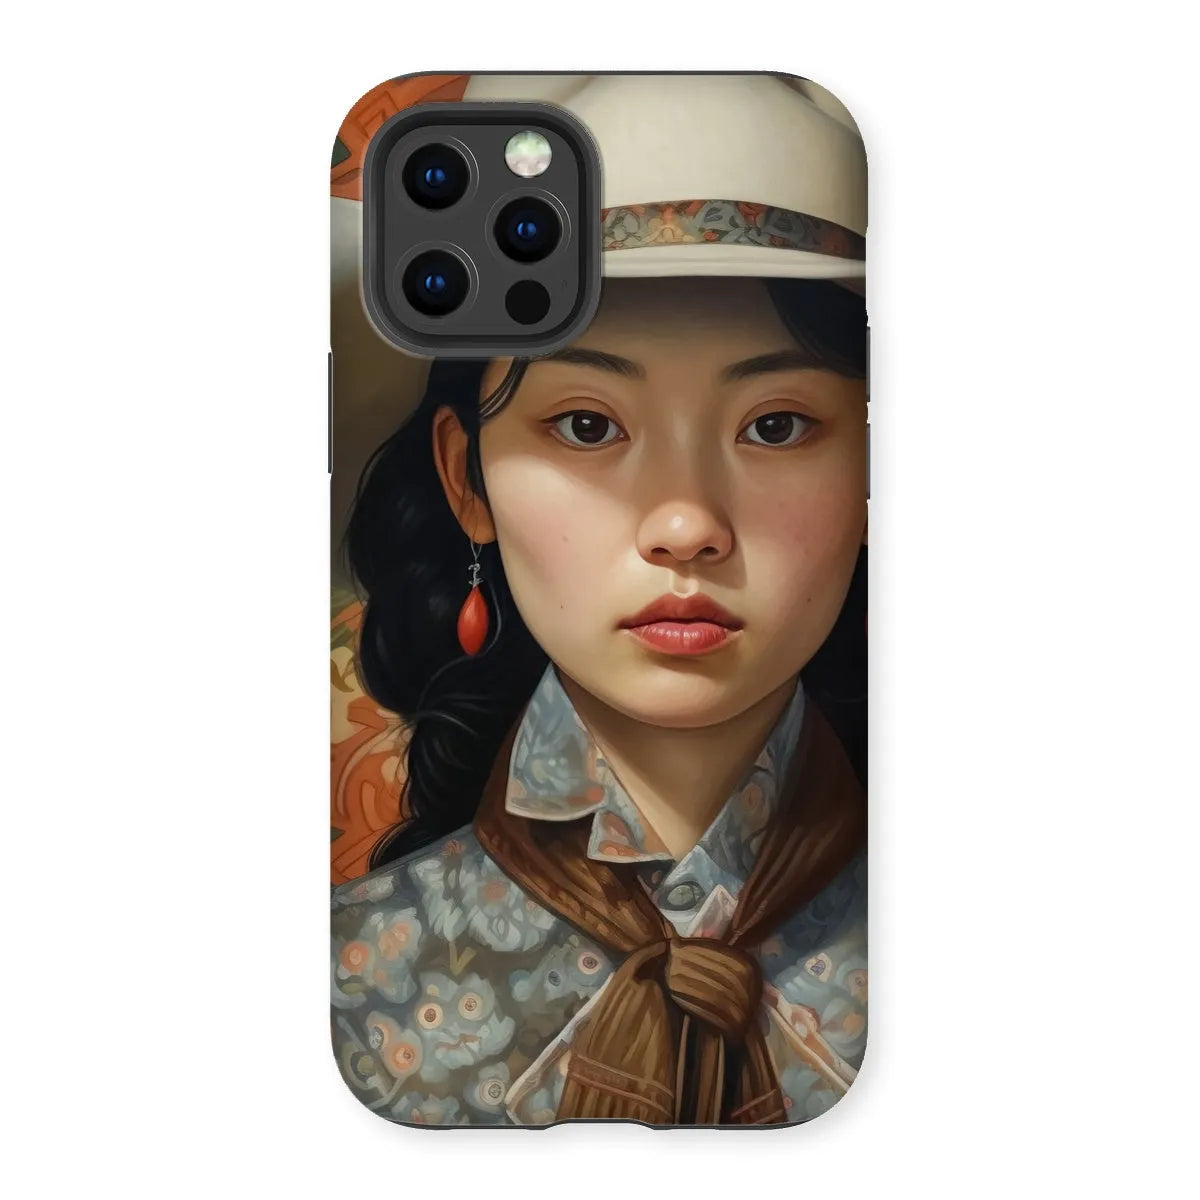 Zhi The Lesbian Cowgirl - Sapphic Art Phone Case - Iphone 12 Pro / Matte - Mobile Phone Cases - Aesthetic Art